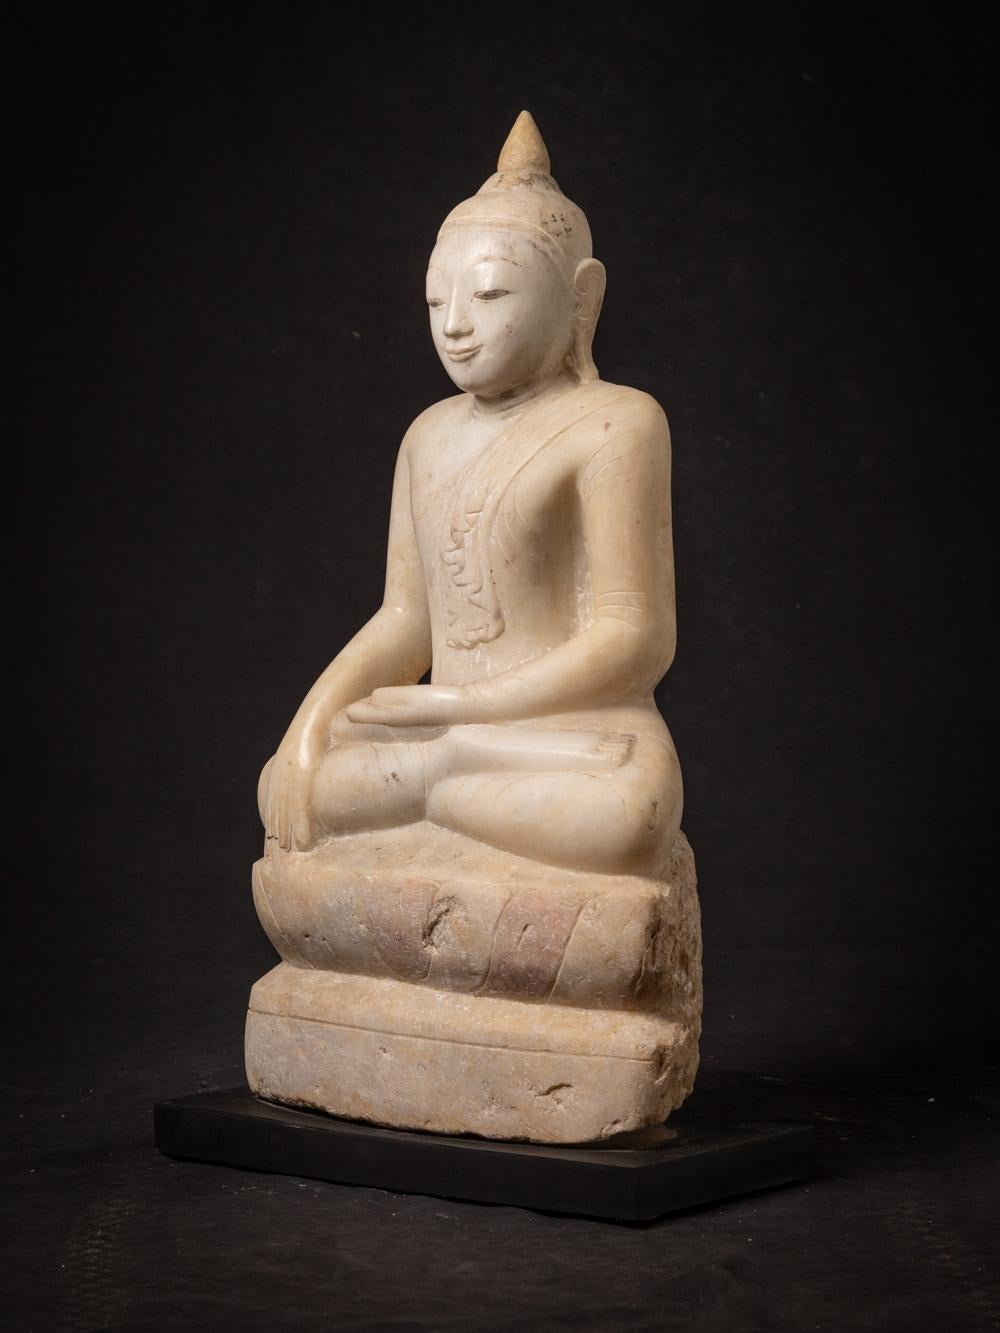 This antique marble Burmese Buddha statue is a magnificent representation of Shan (Tai Yai) style artistry and Buddhist devotion. Crafted from marble, it stands at an impressive height of 68.5 cm and has dimensions of 41 cm in width and 18 cm in